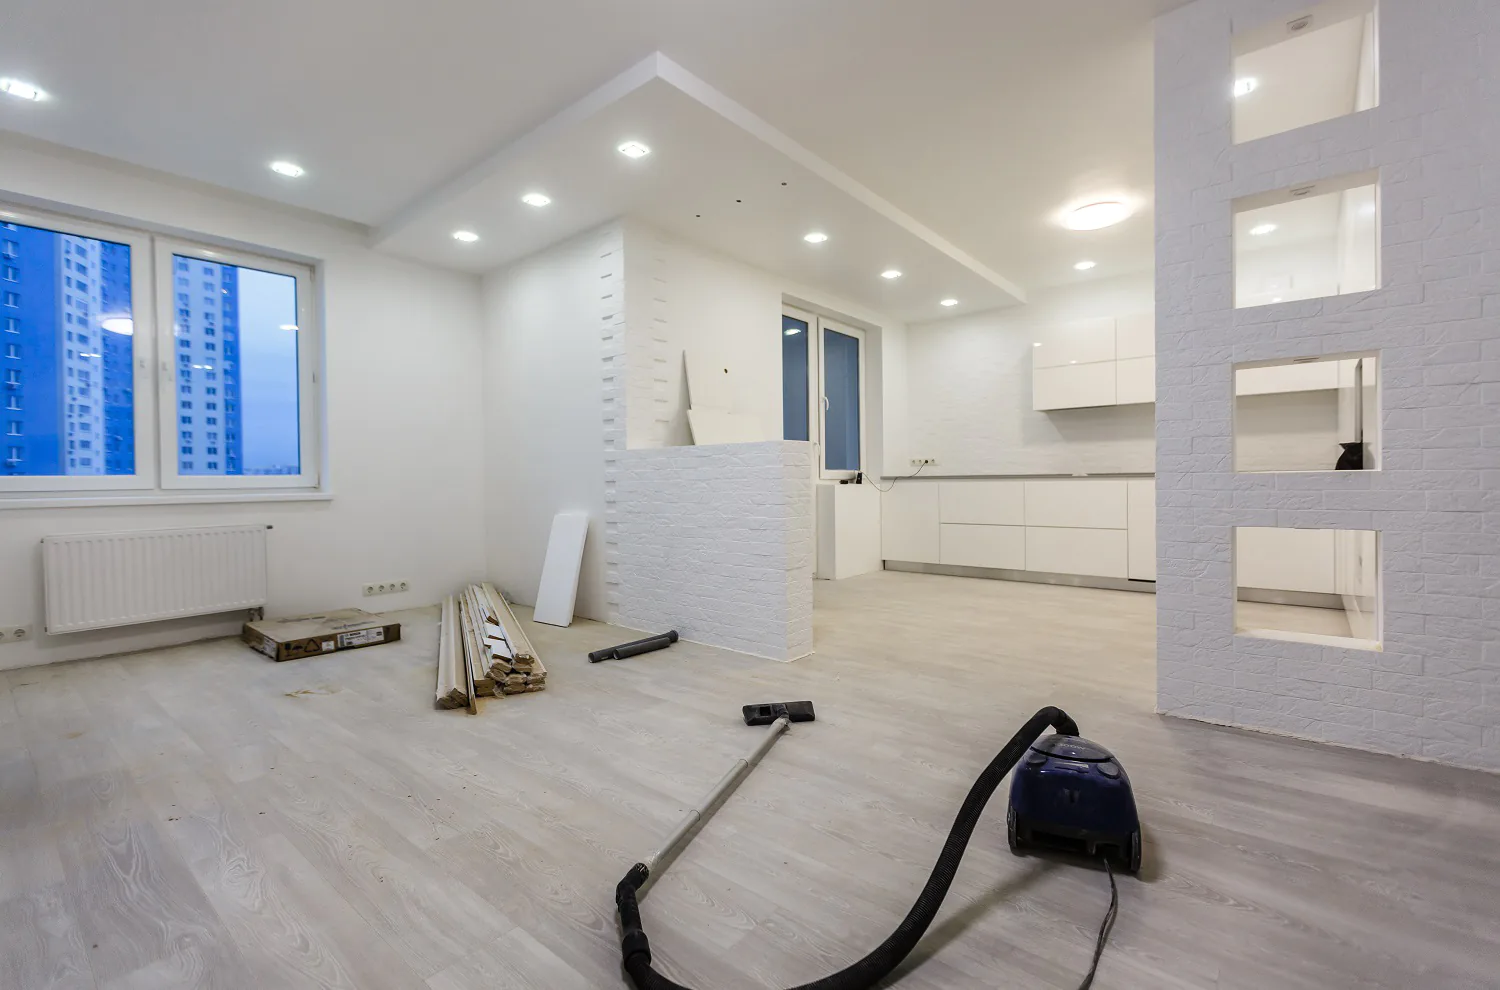 Post Renovation Professional residential and commercial cleaning services in Philadelphia